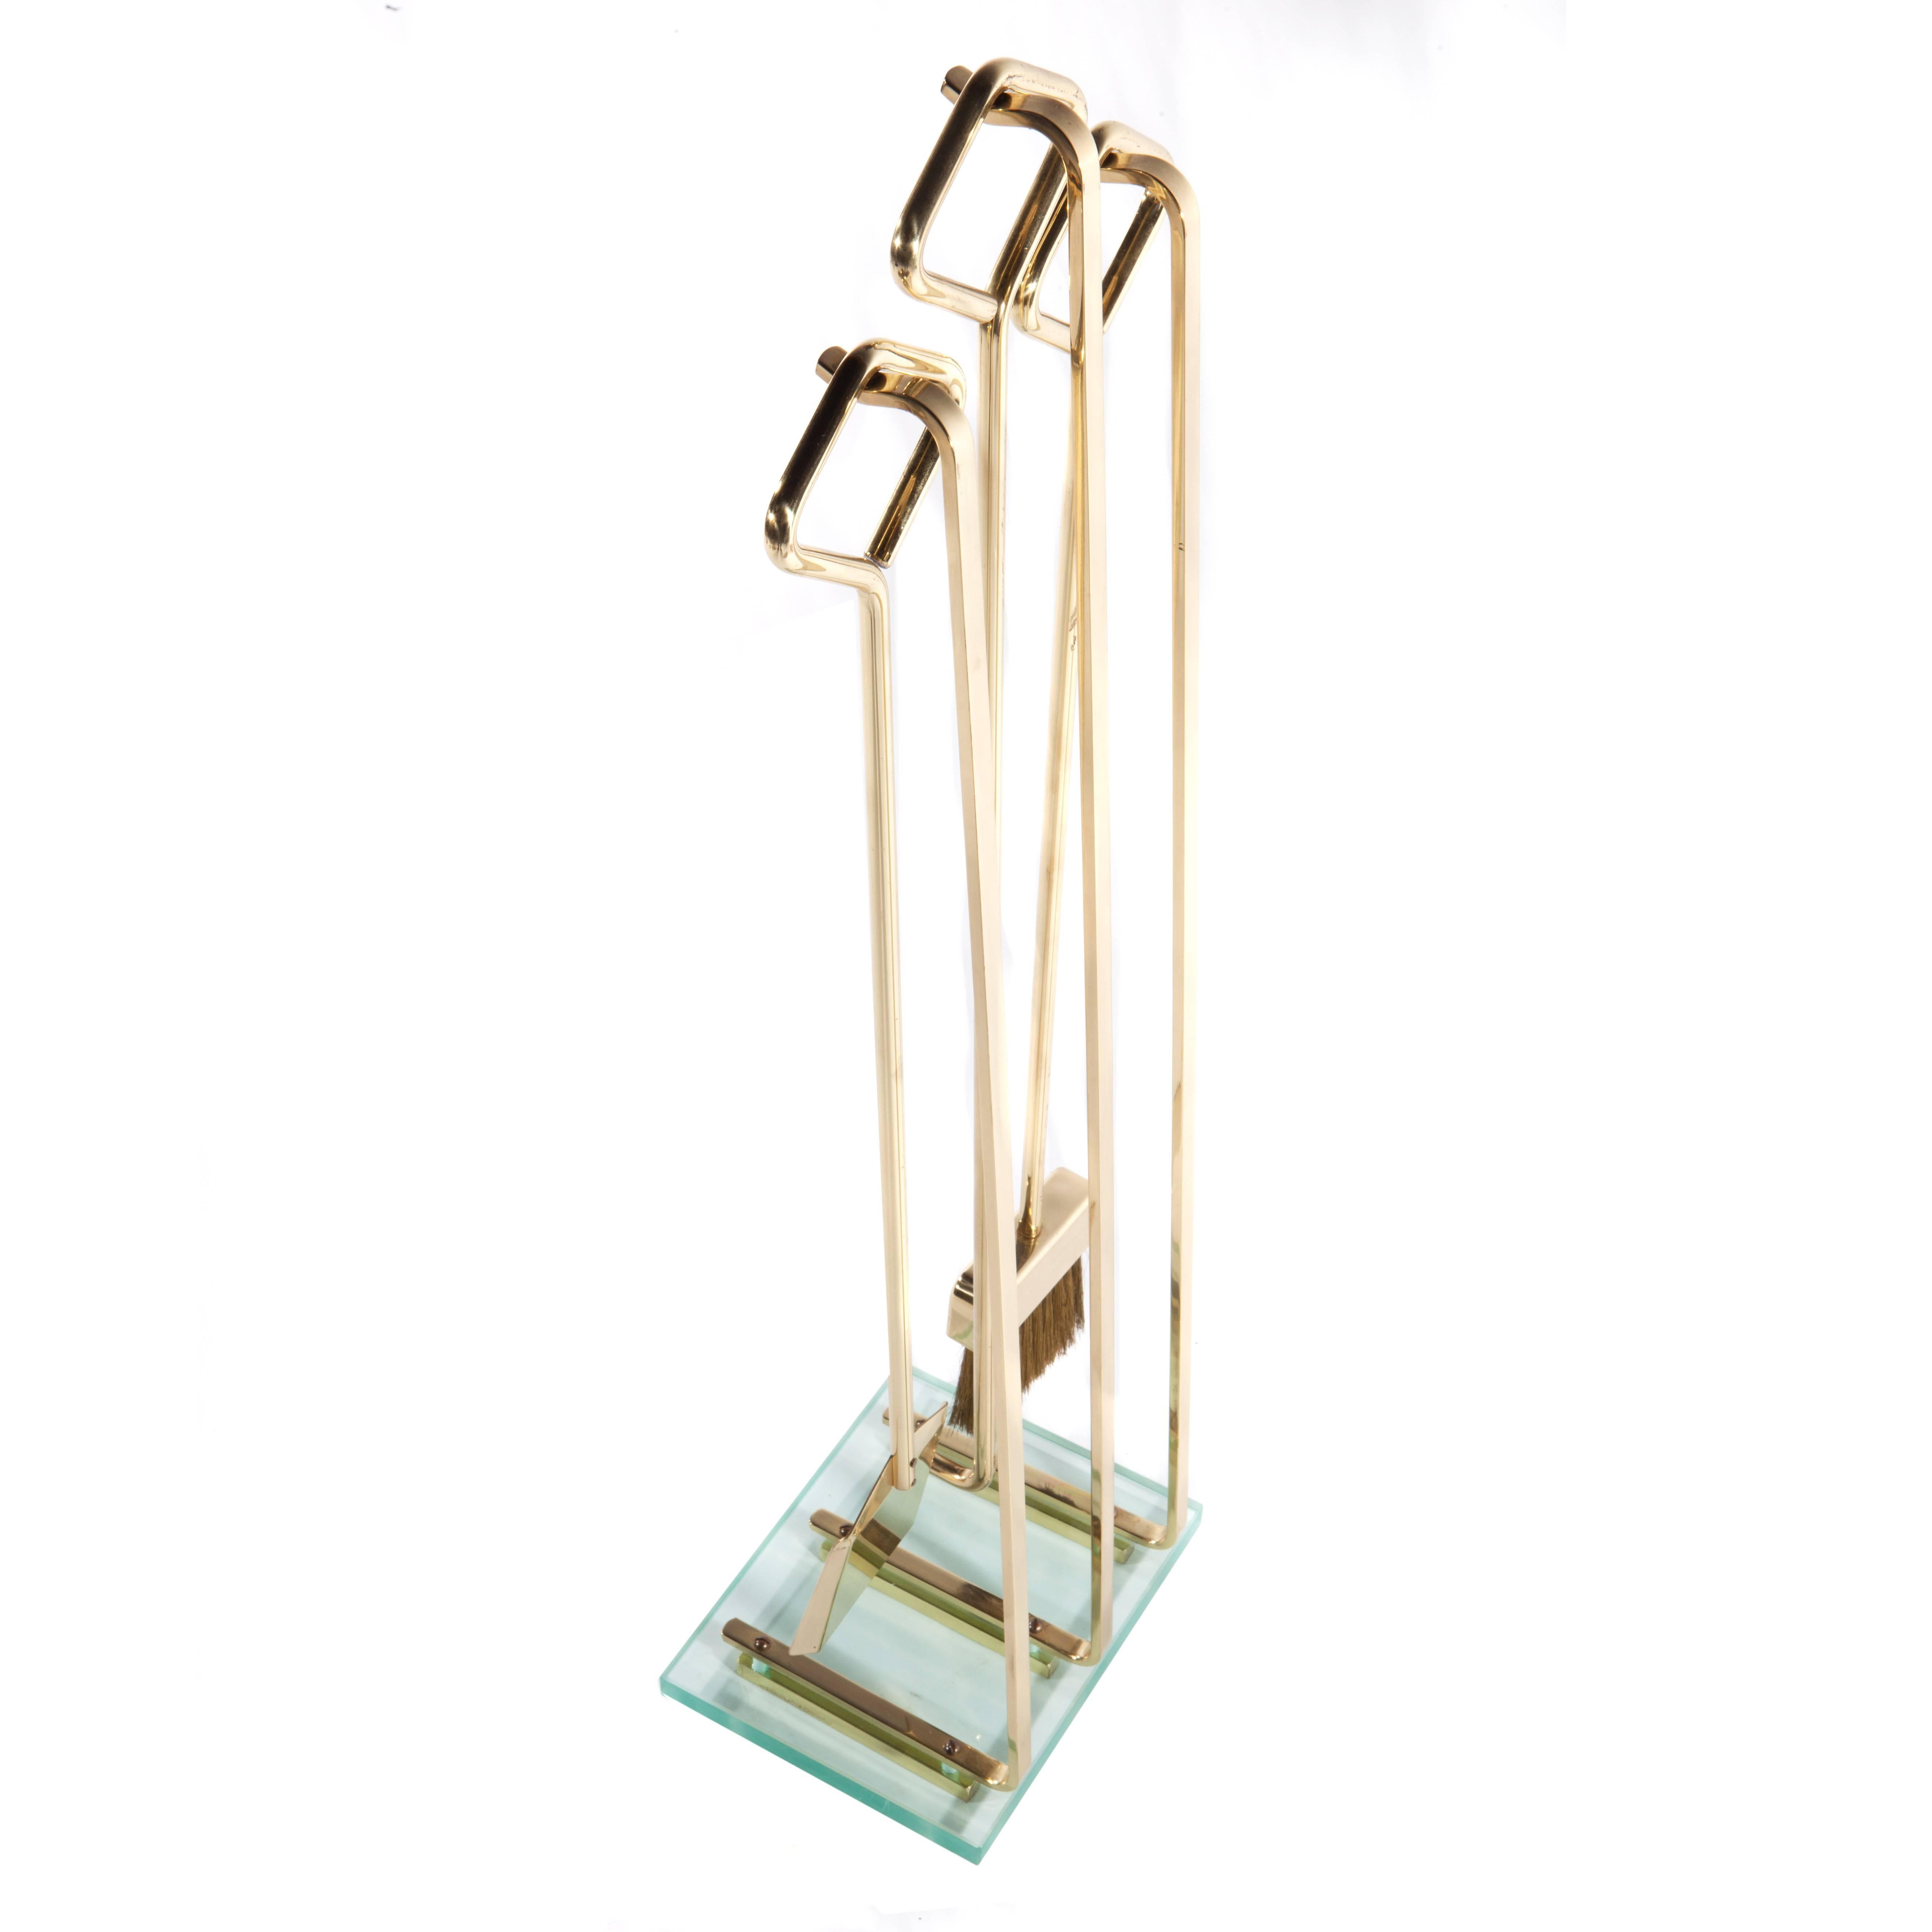 1970s fireplace tools with shovel, poker and broom, each ending in a diamond-shaped, bent-brass handle. Thick, rectangular glass base anchors three brass support hooks. 


